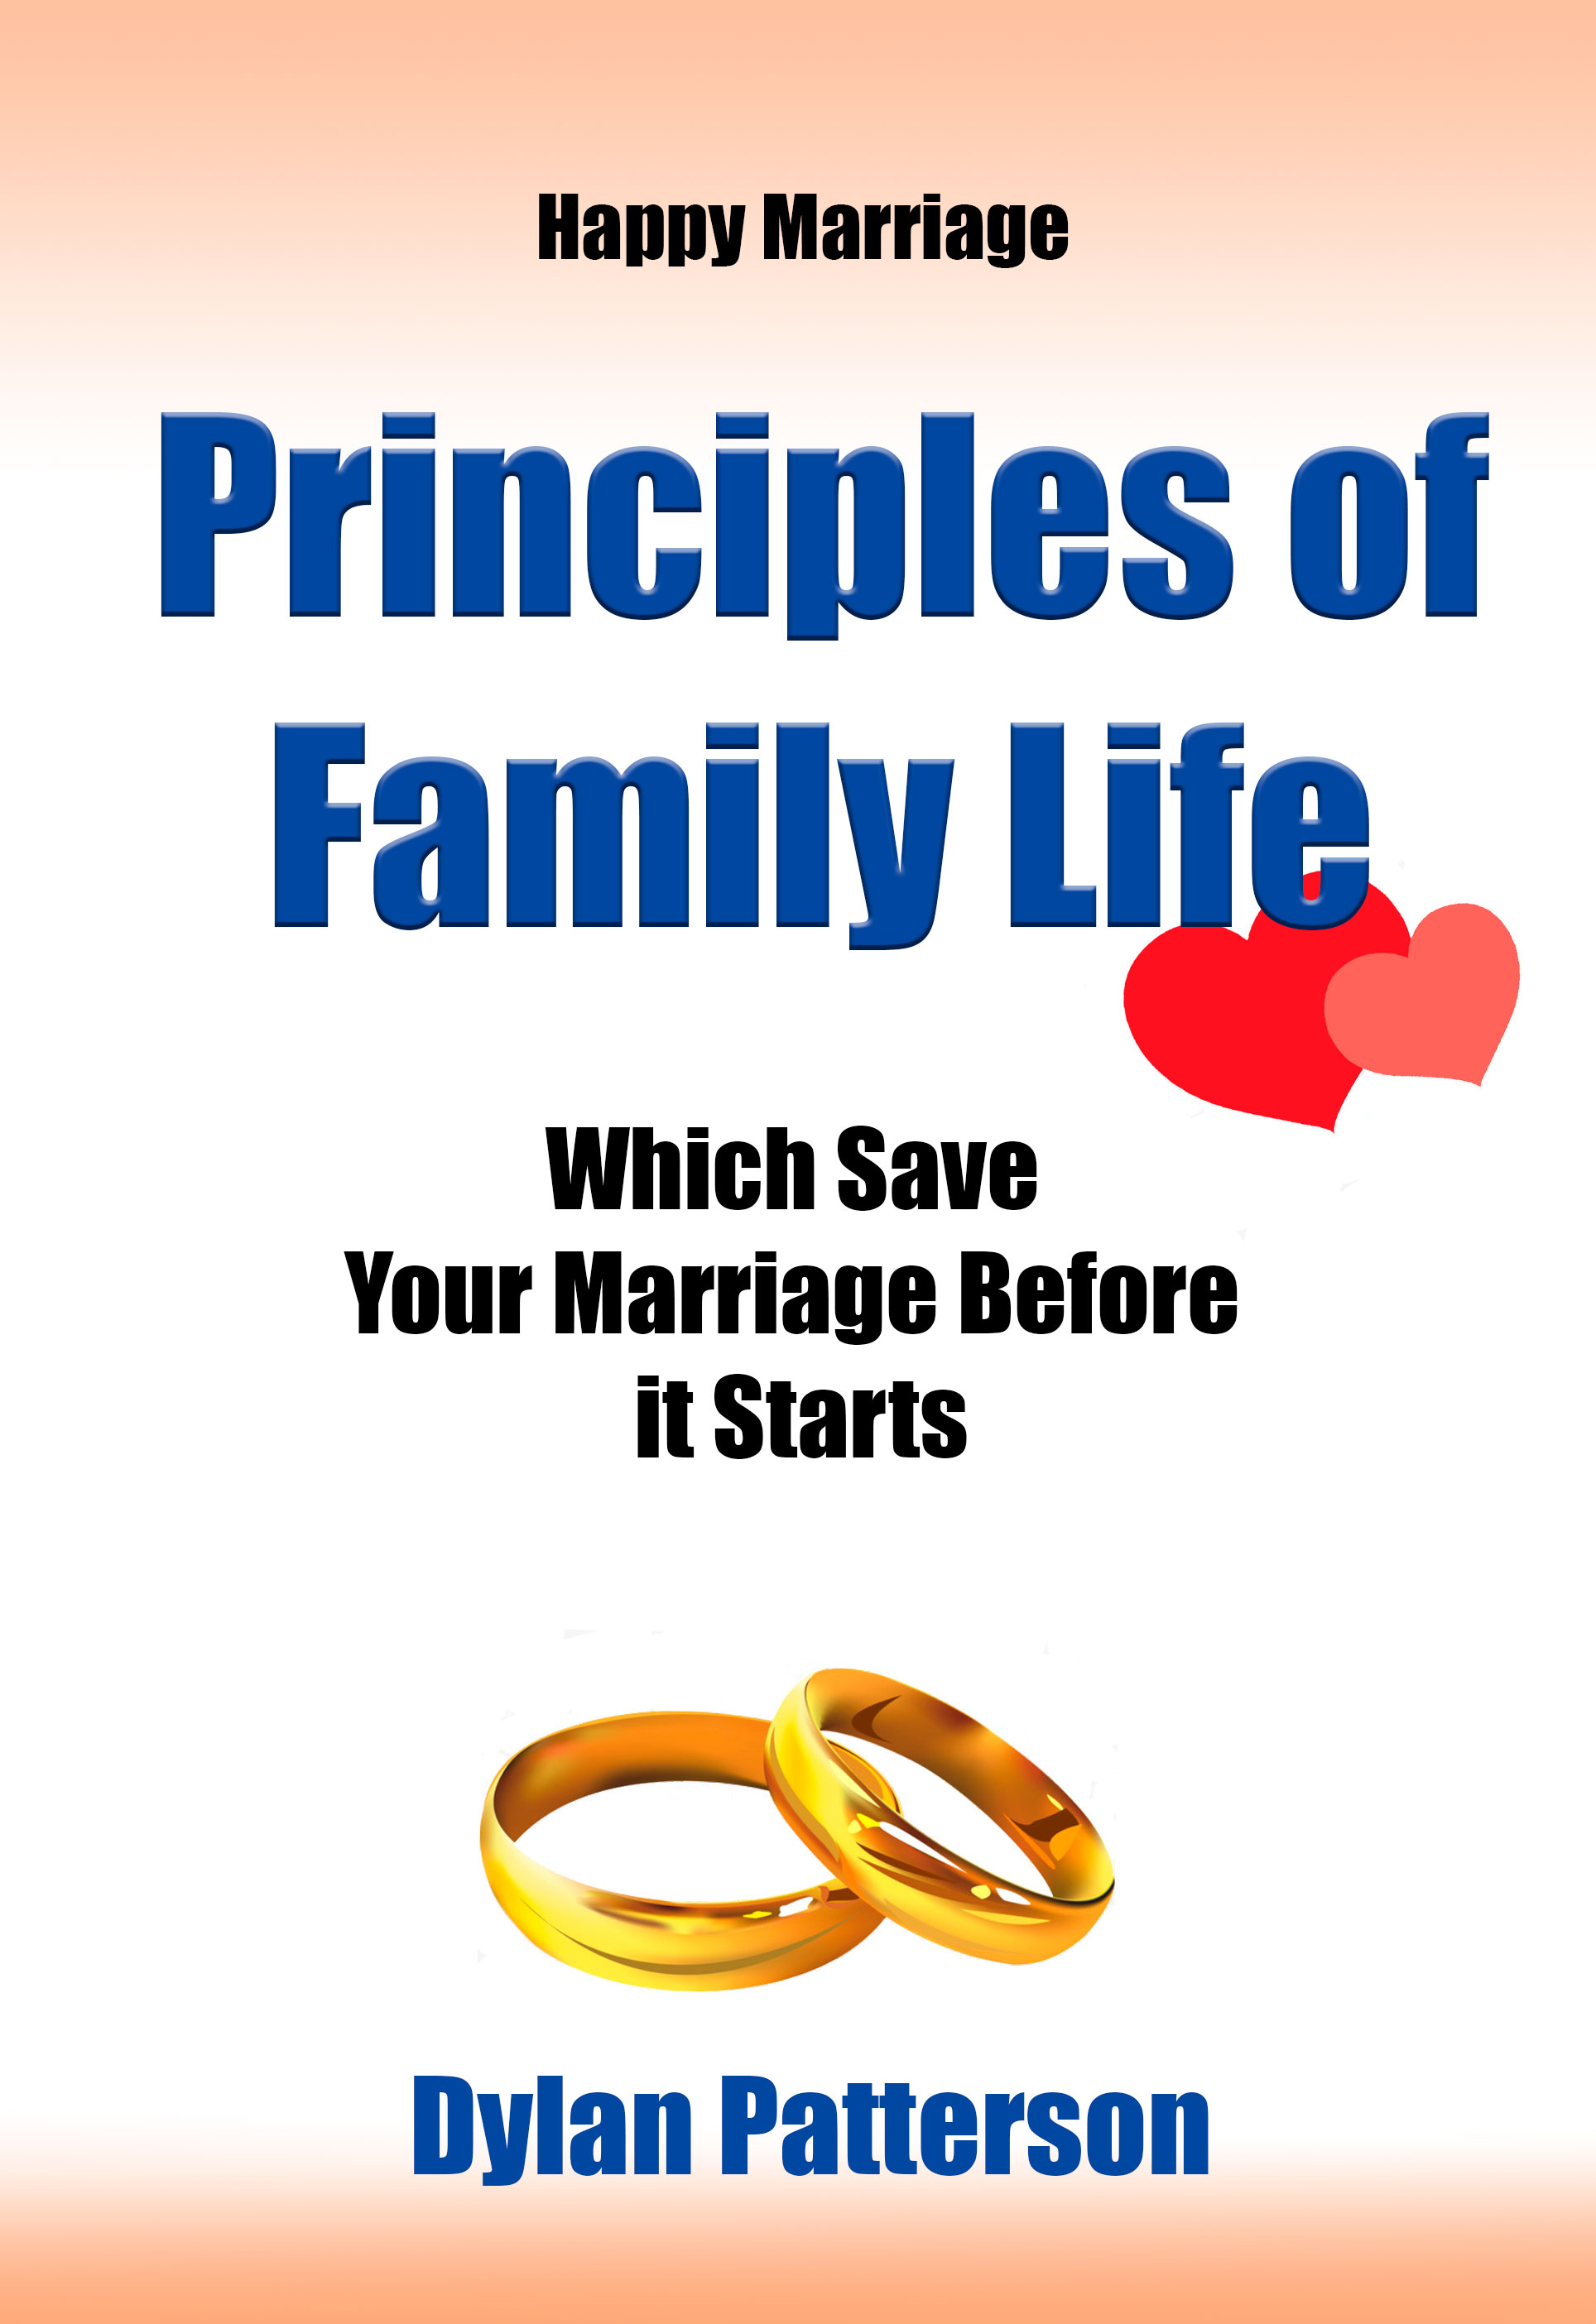 FREE: Happy Marriage Principles of Family Life Which Save Your Marriage Before it Starts by Dylan Patterson